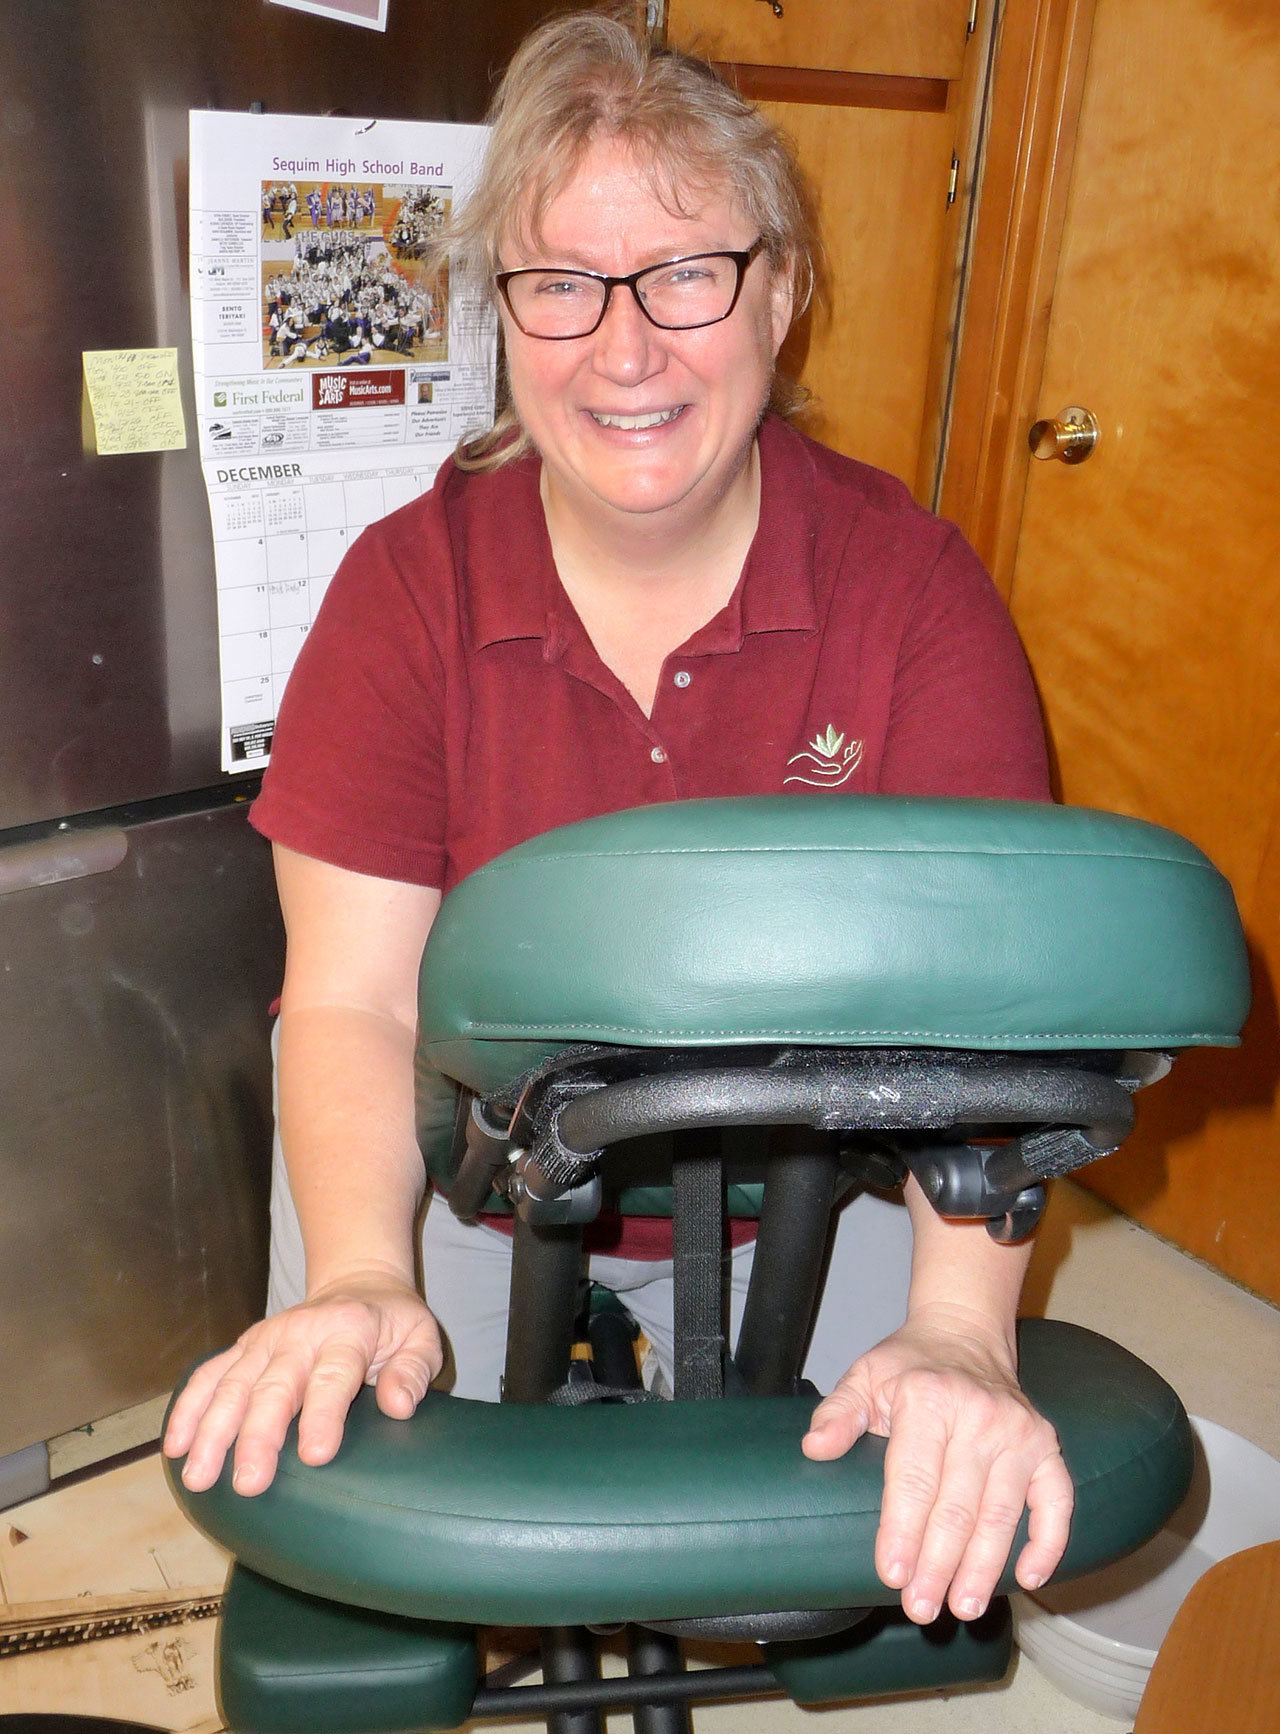 Massage therapist Cheryl Powell strikes a pose with her portable massage chair. Sequim Gazette photo by Patricia Morrison Coate